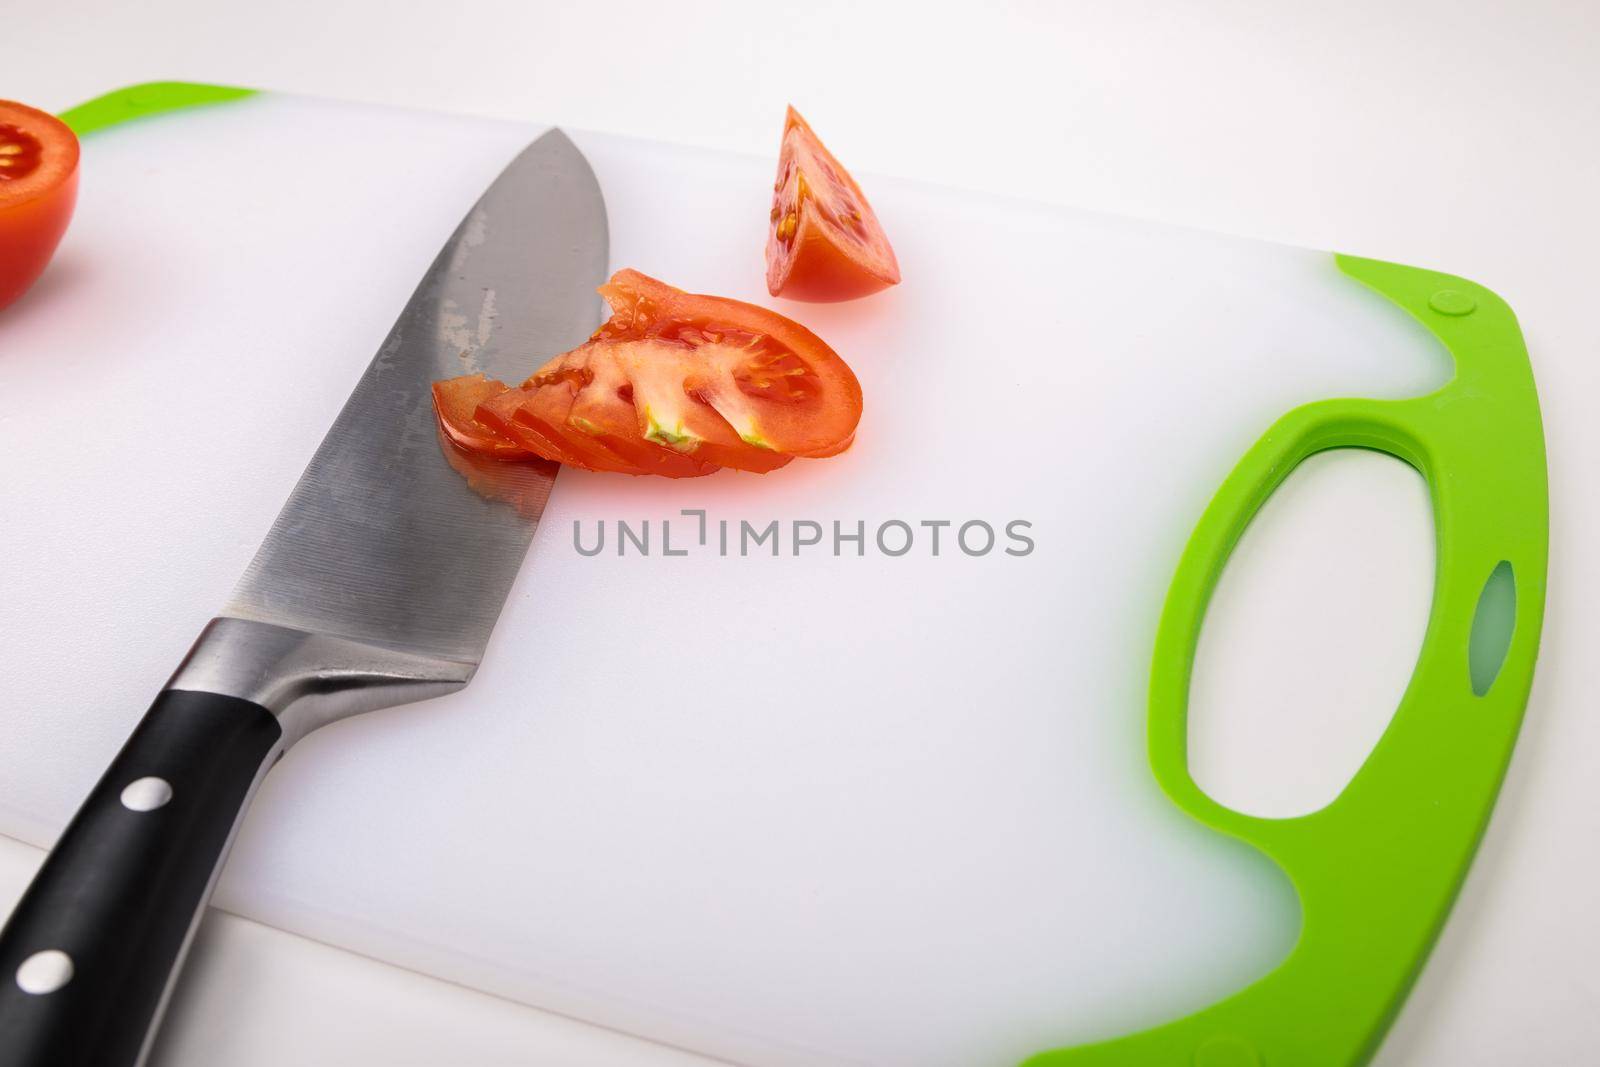 On a cutting board is a fresh red cut tomato and a large chef's knife. by Yurich32